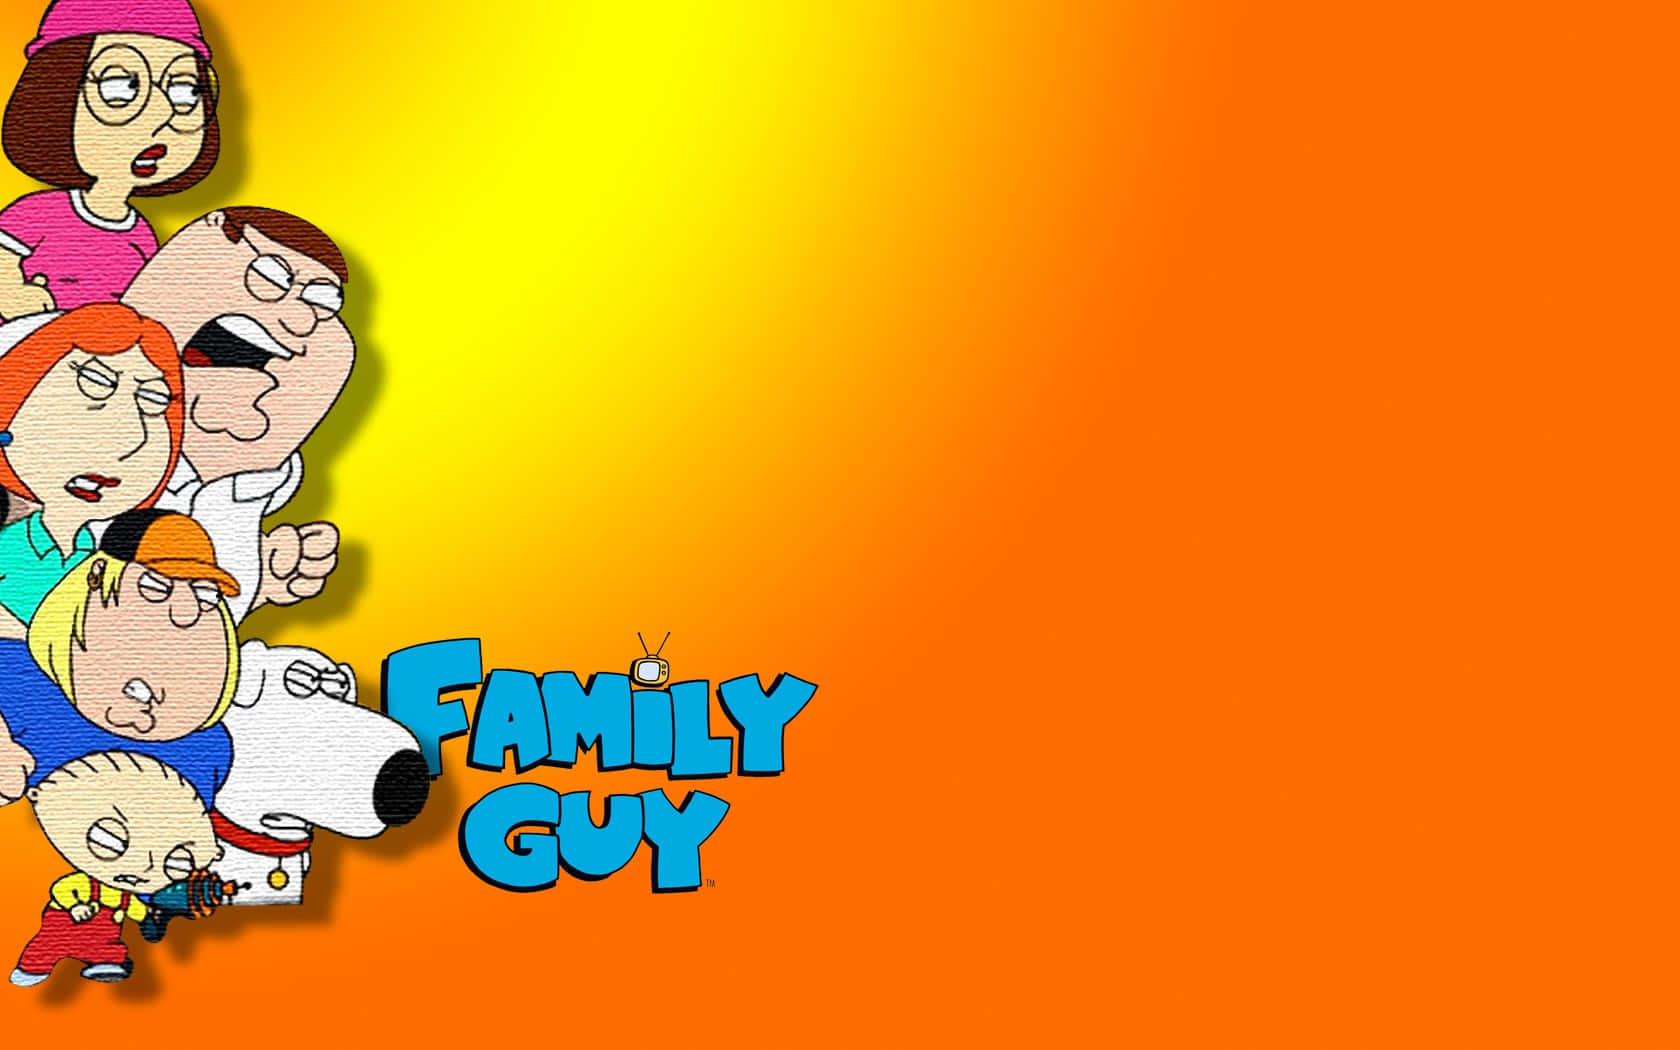 Catch the newest episode of Family Guy on Sunday night